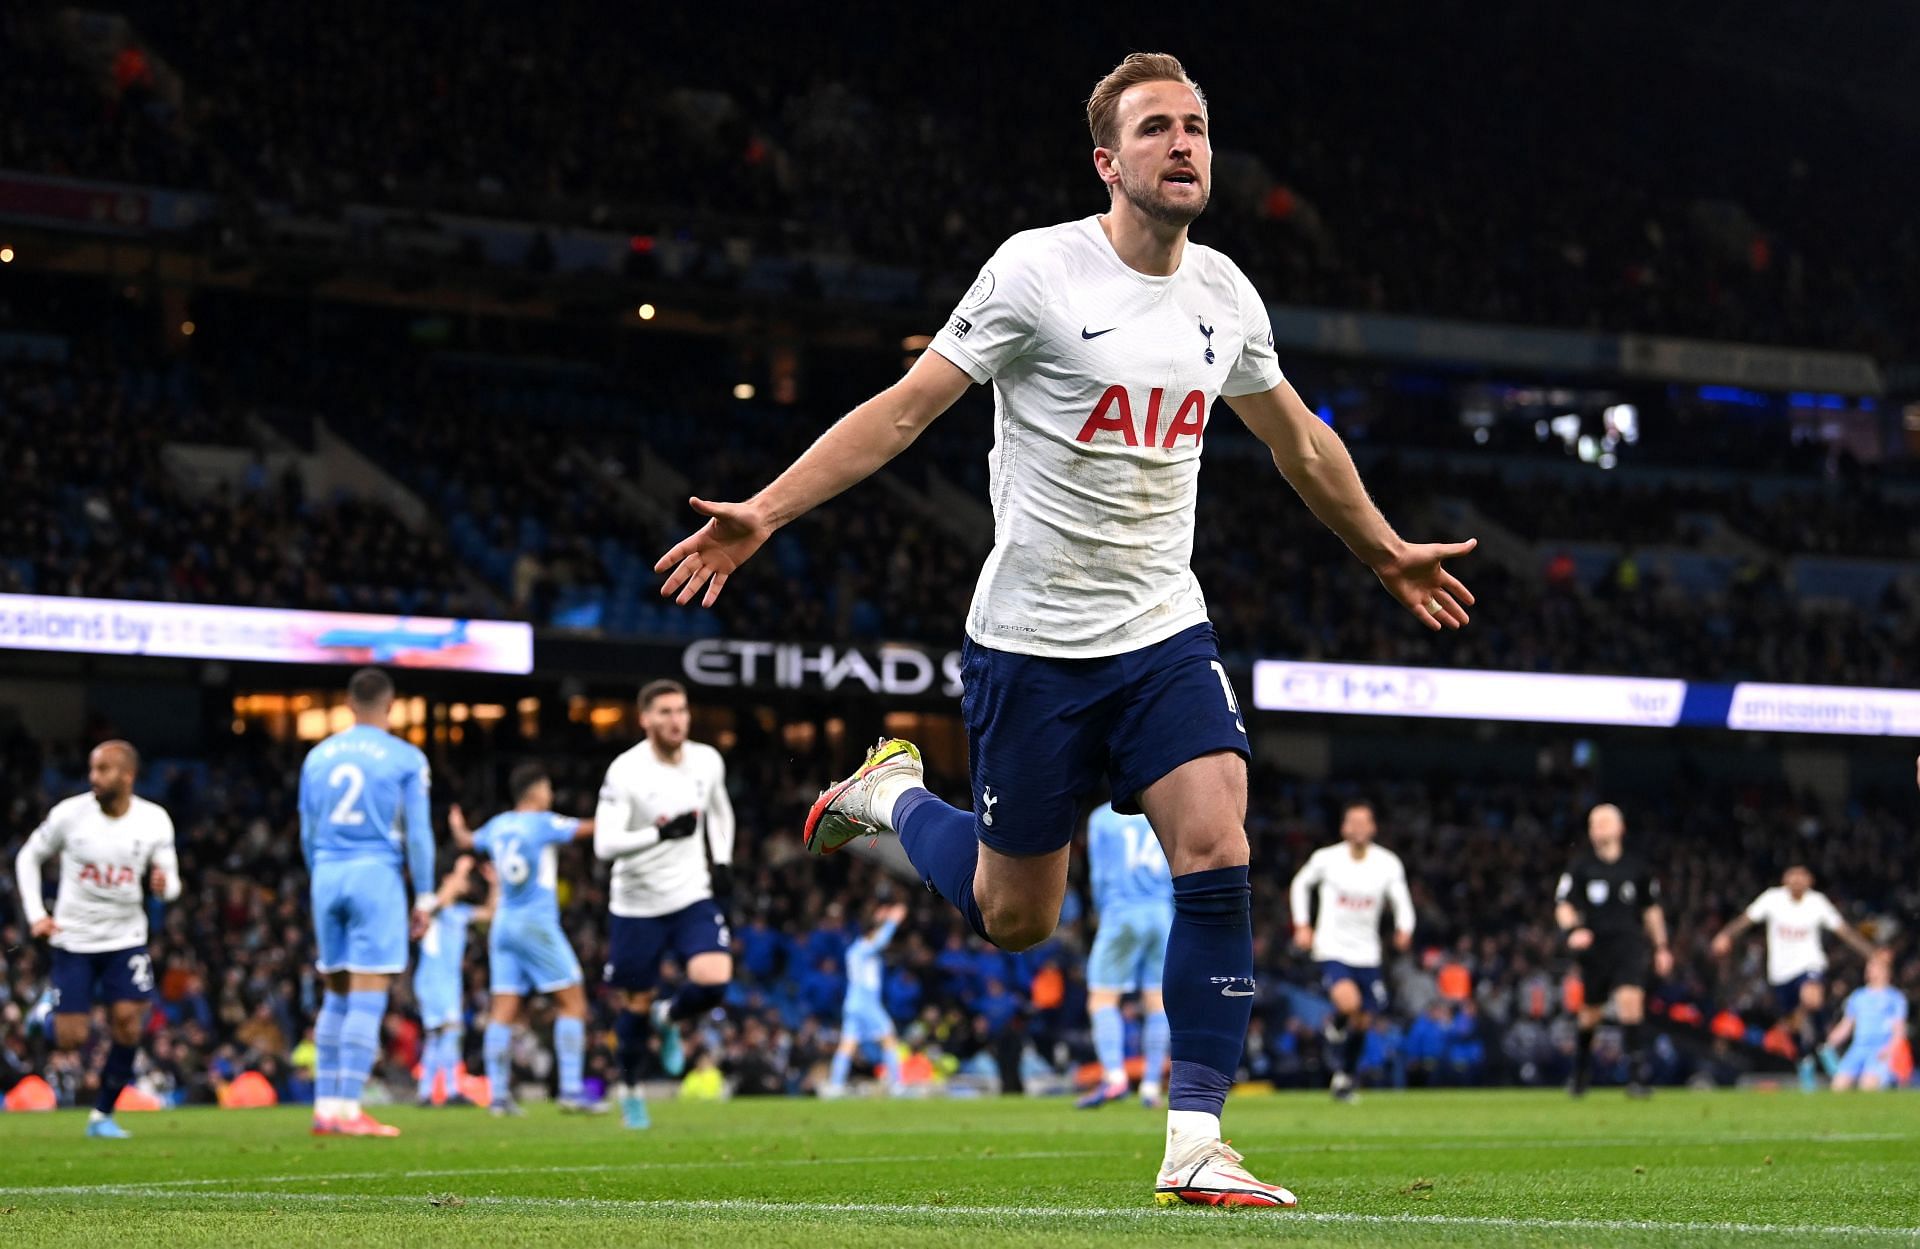 Harry Kane was instrumental in the dramatic 2-3 away win against Manchester City